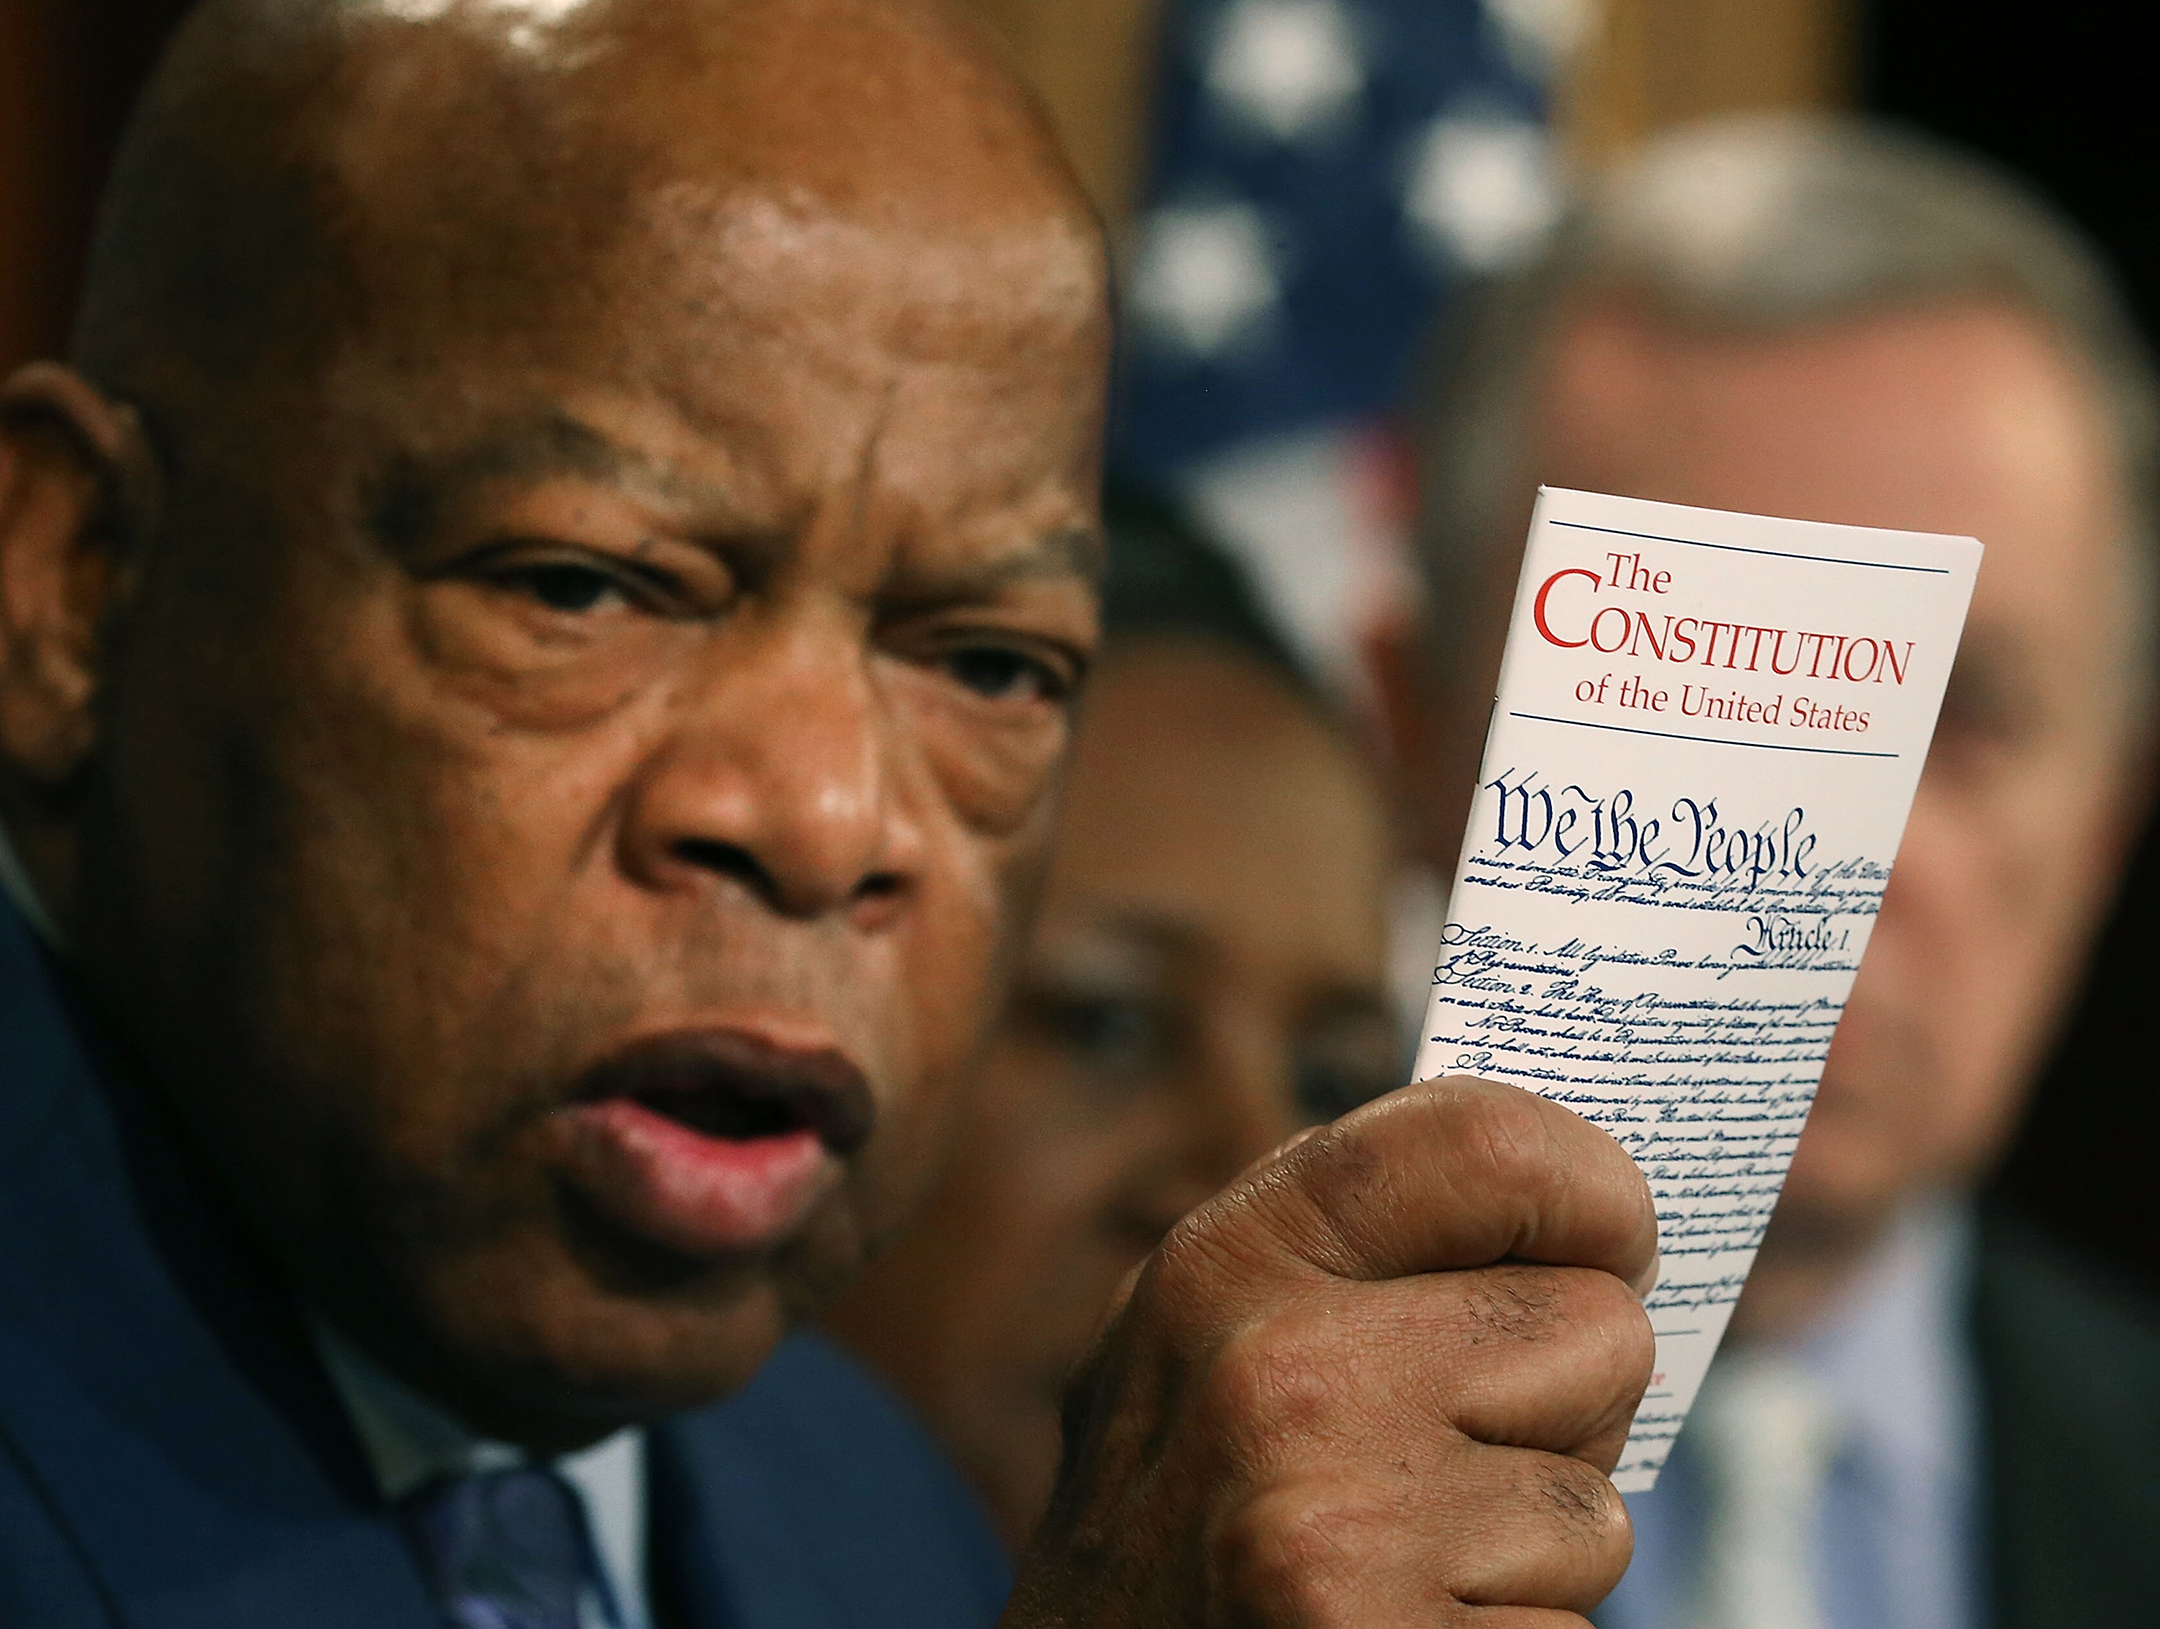 Photograph of John Lewis holding a pocket-sized Constitution, with the Constitution in focus in the foreground